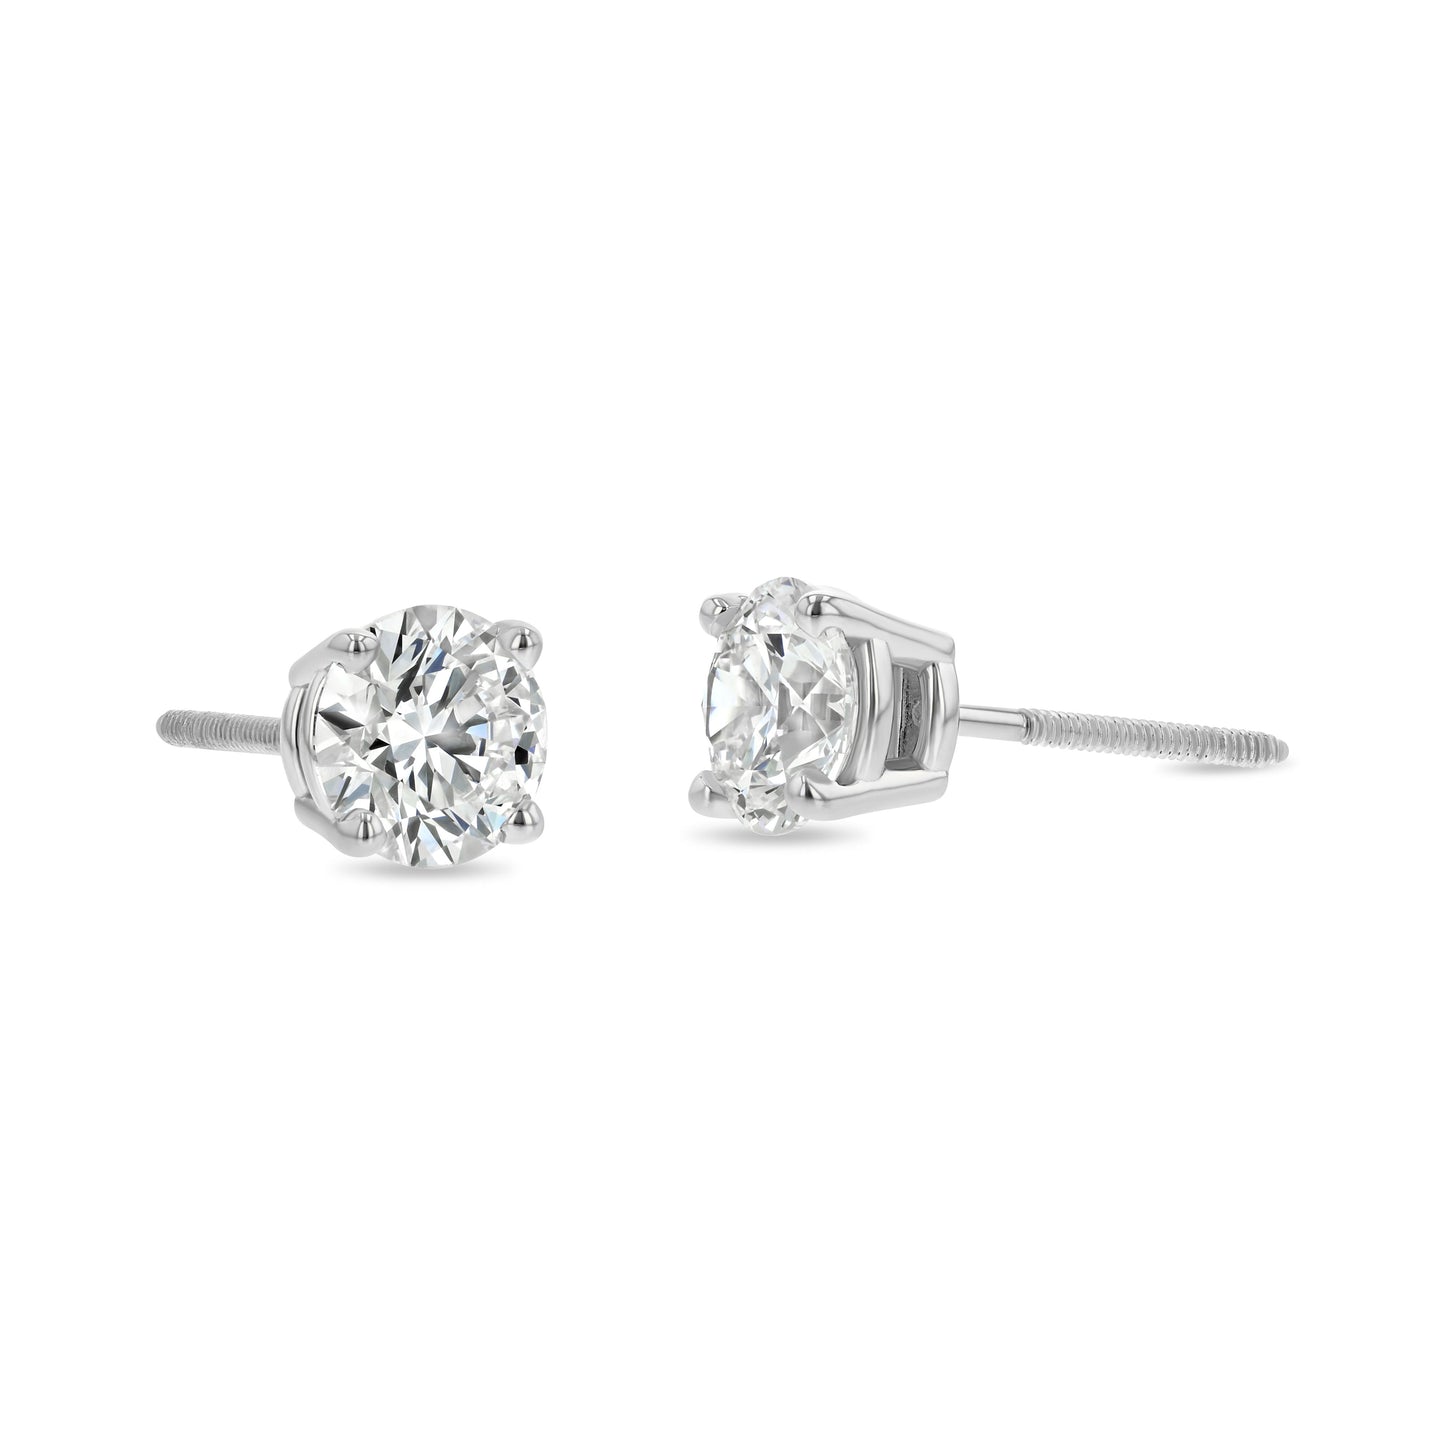 18k White Gold 4-prong Round Diamond Stud Earrings 1ctw (5.00mm Ea), G Color, Si3 Clarity